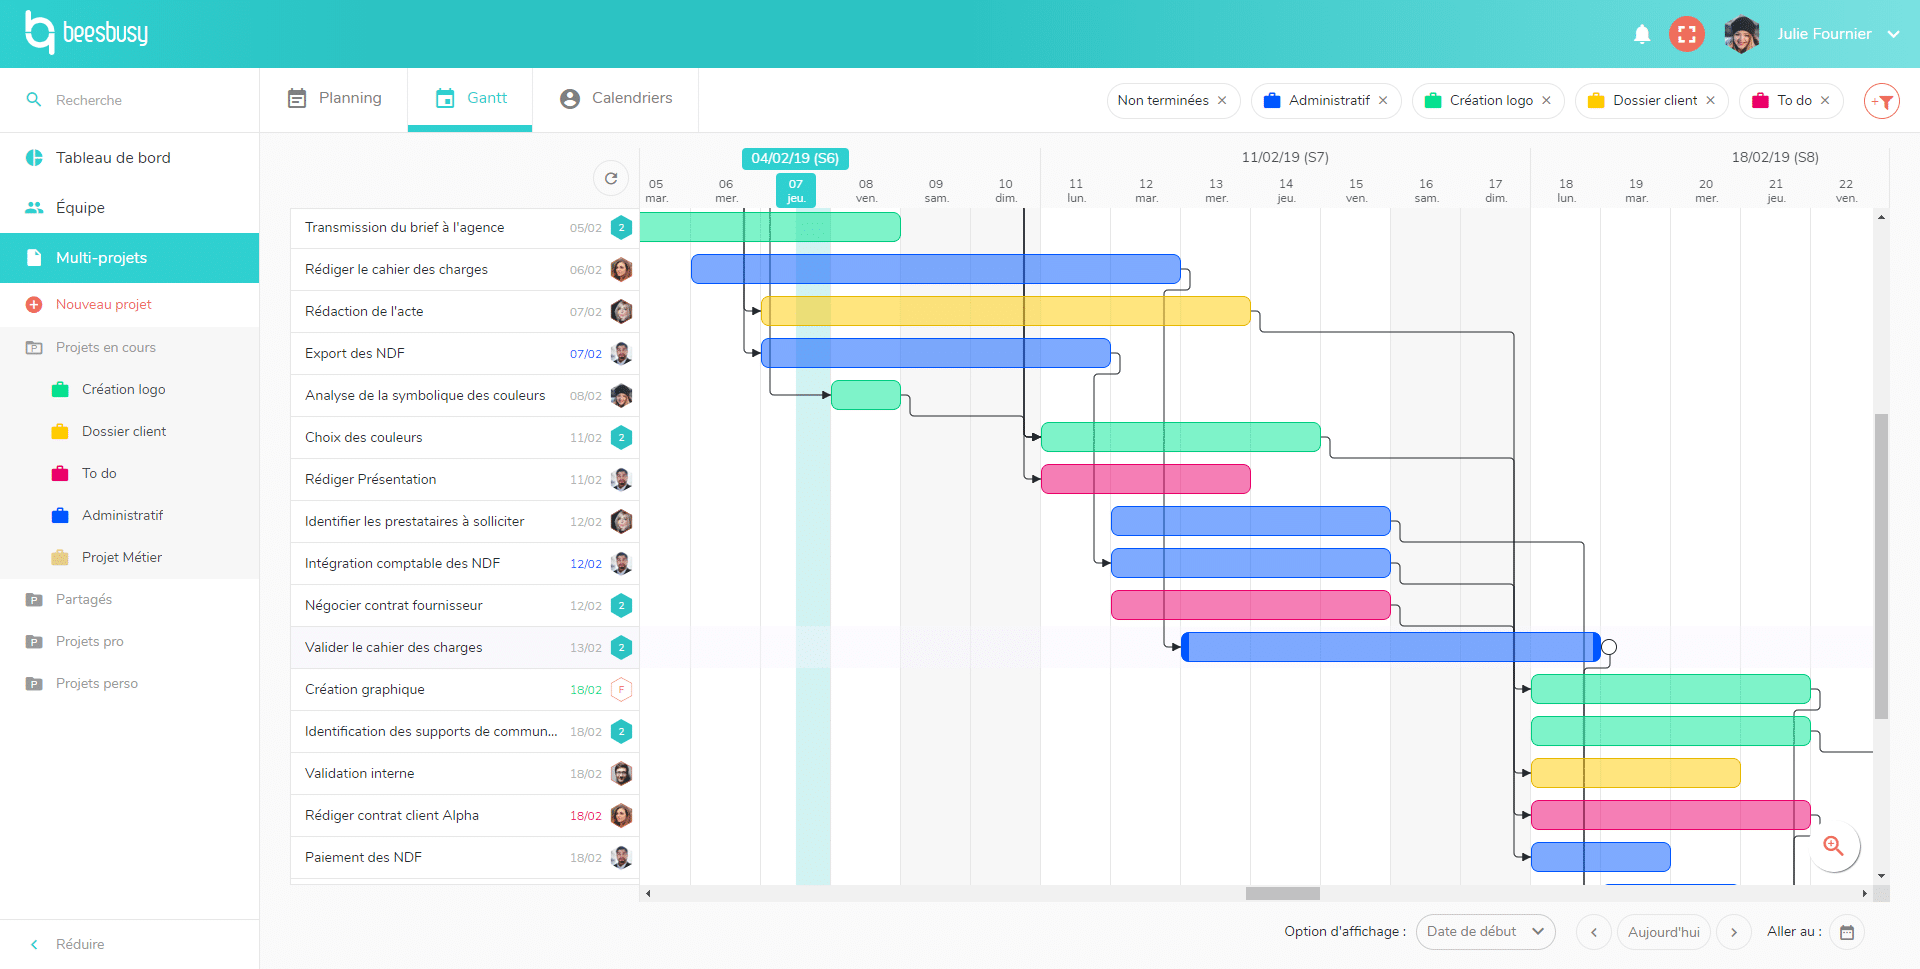 This view displays the selected projects in Gantt chart.